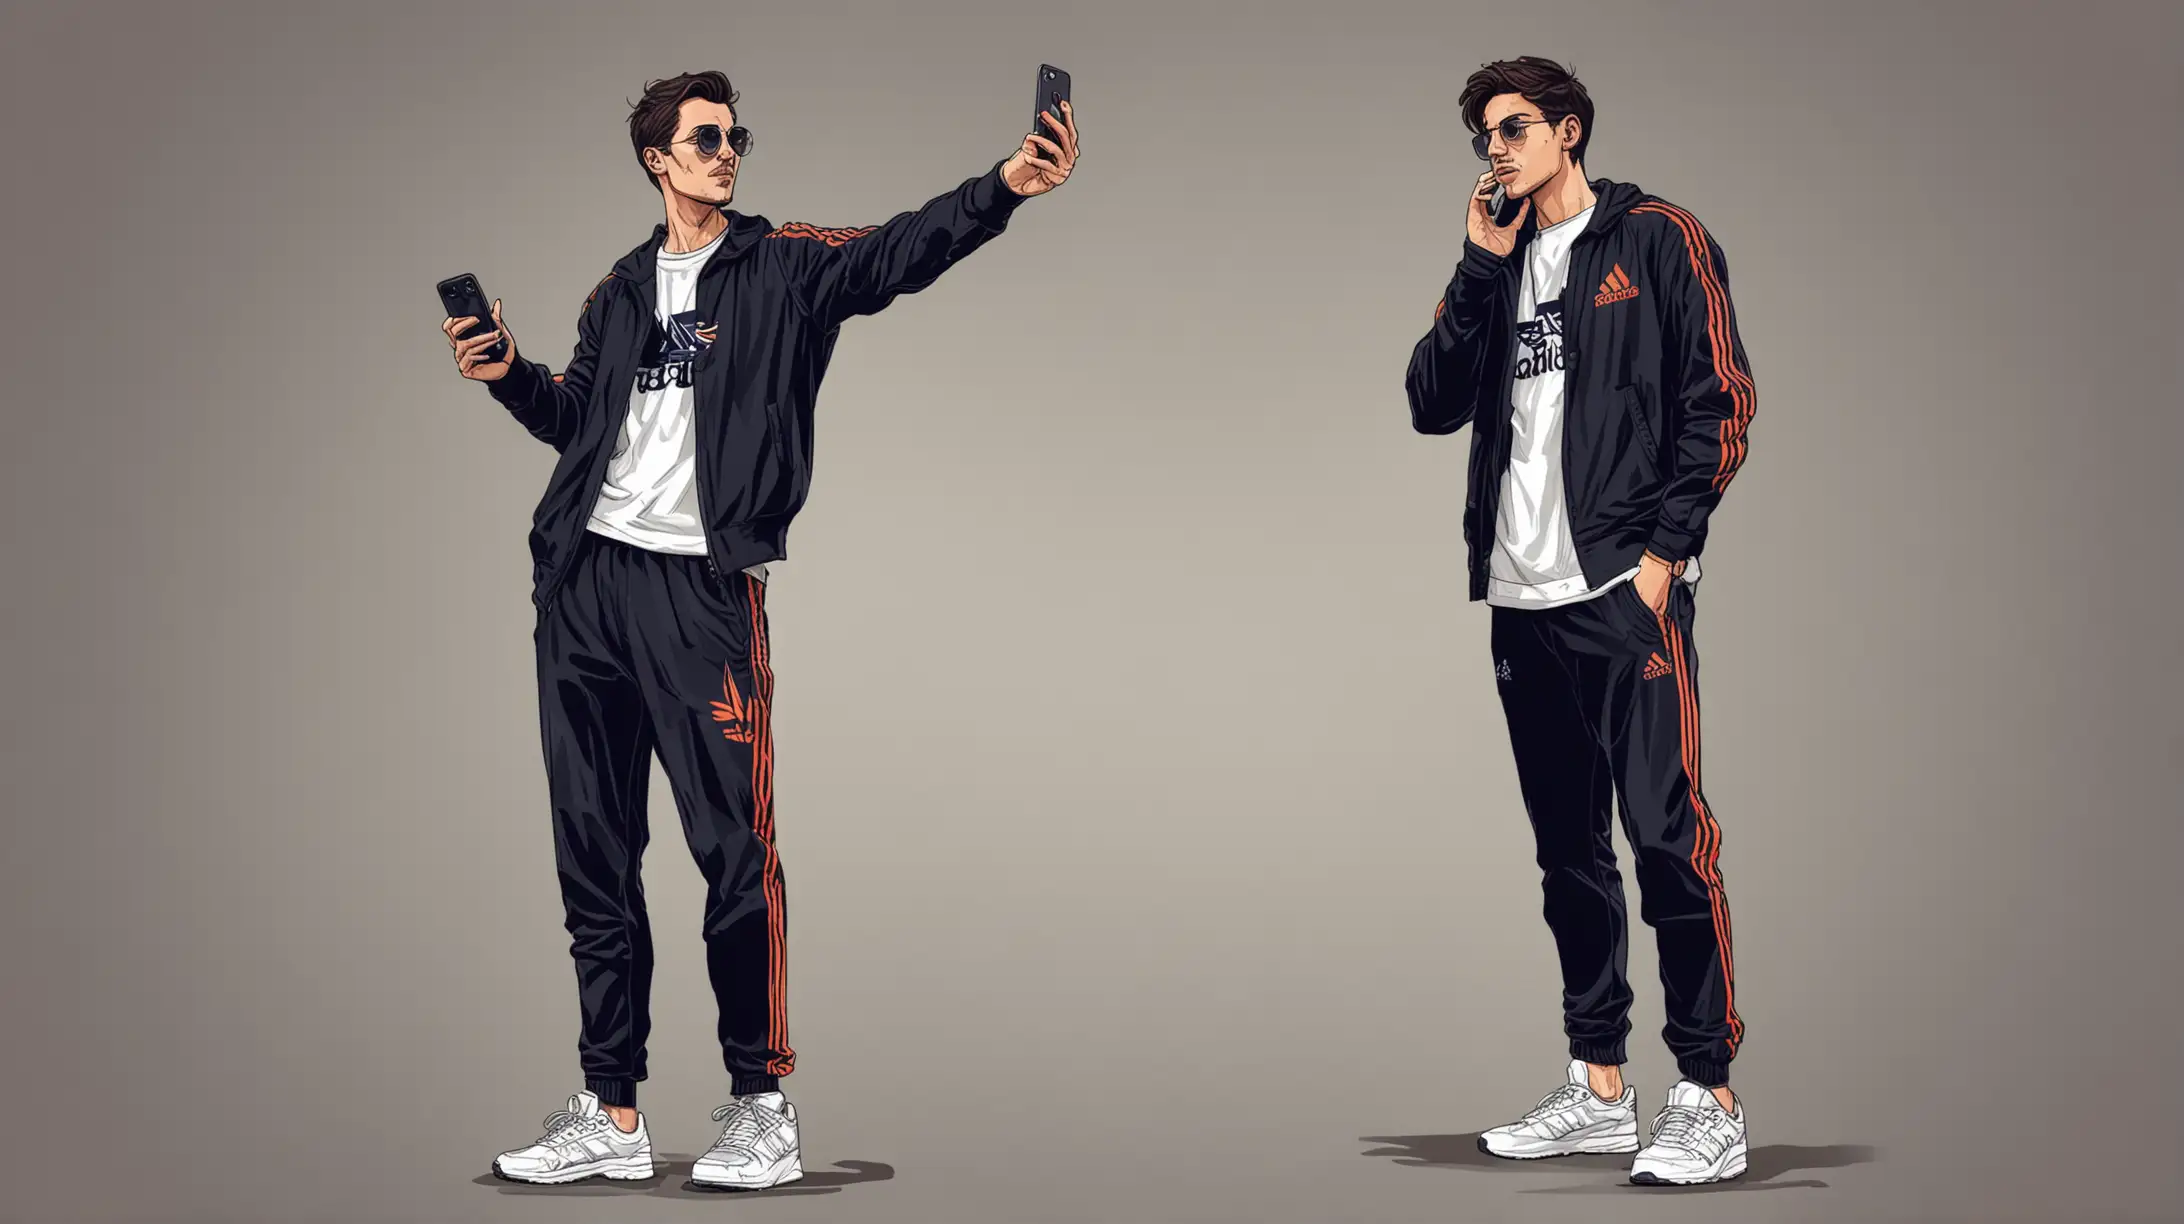 Urban Style Man Taking Selfie in Adidas Track Suit and Sneakers